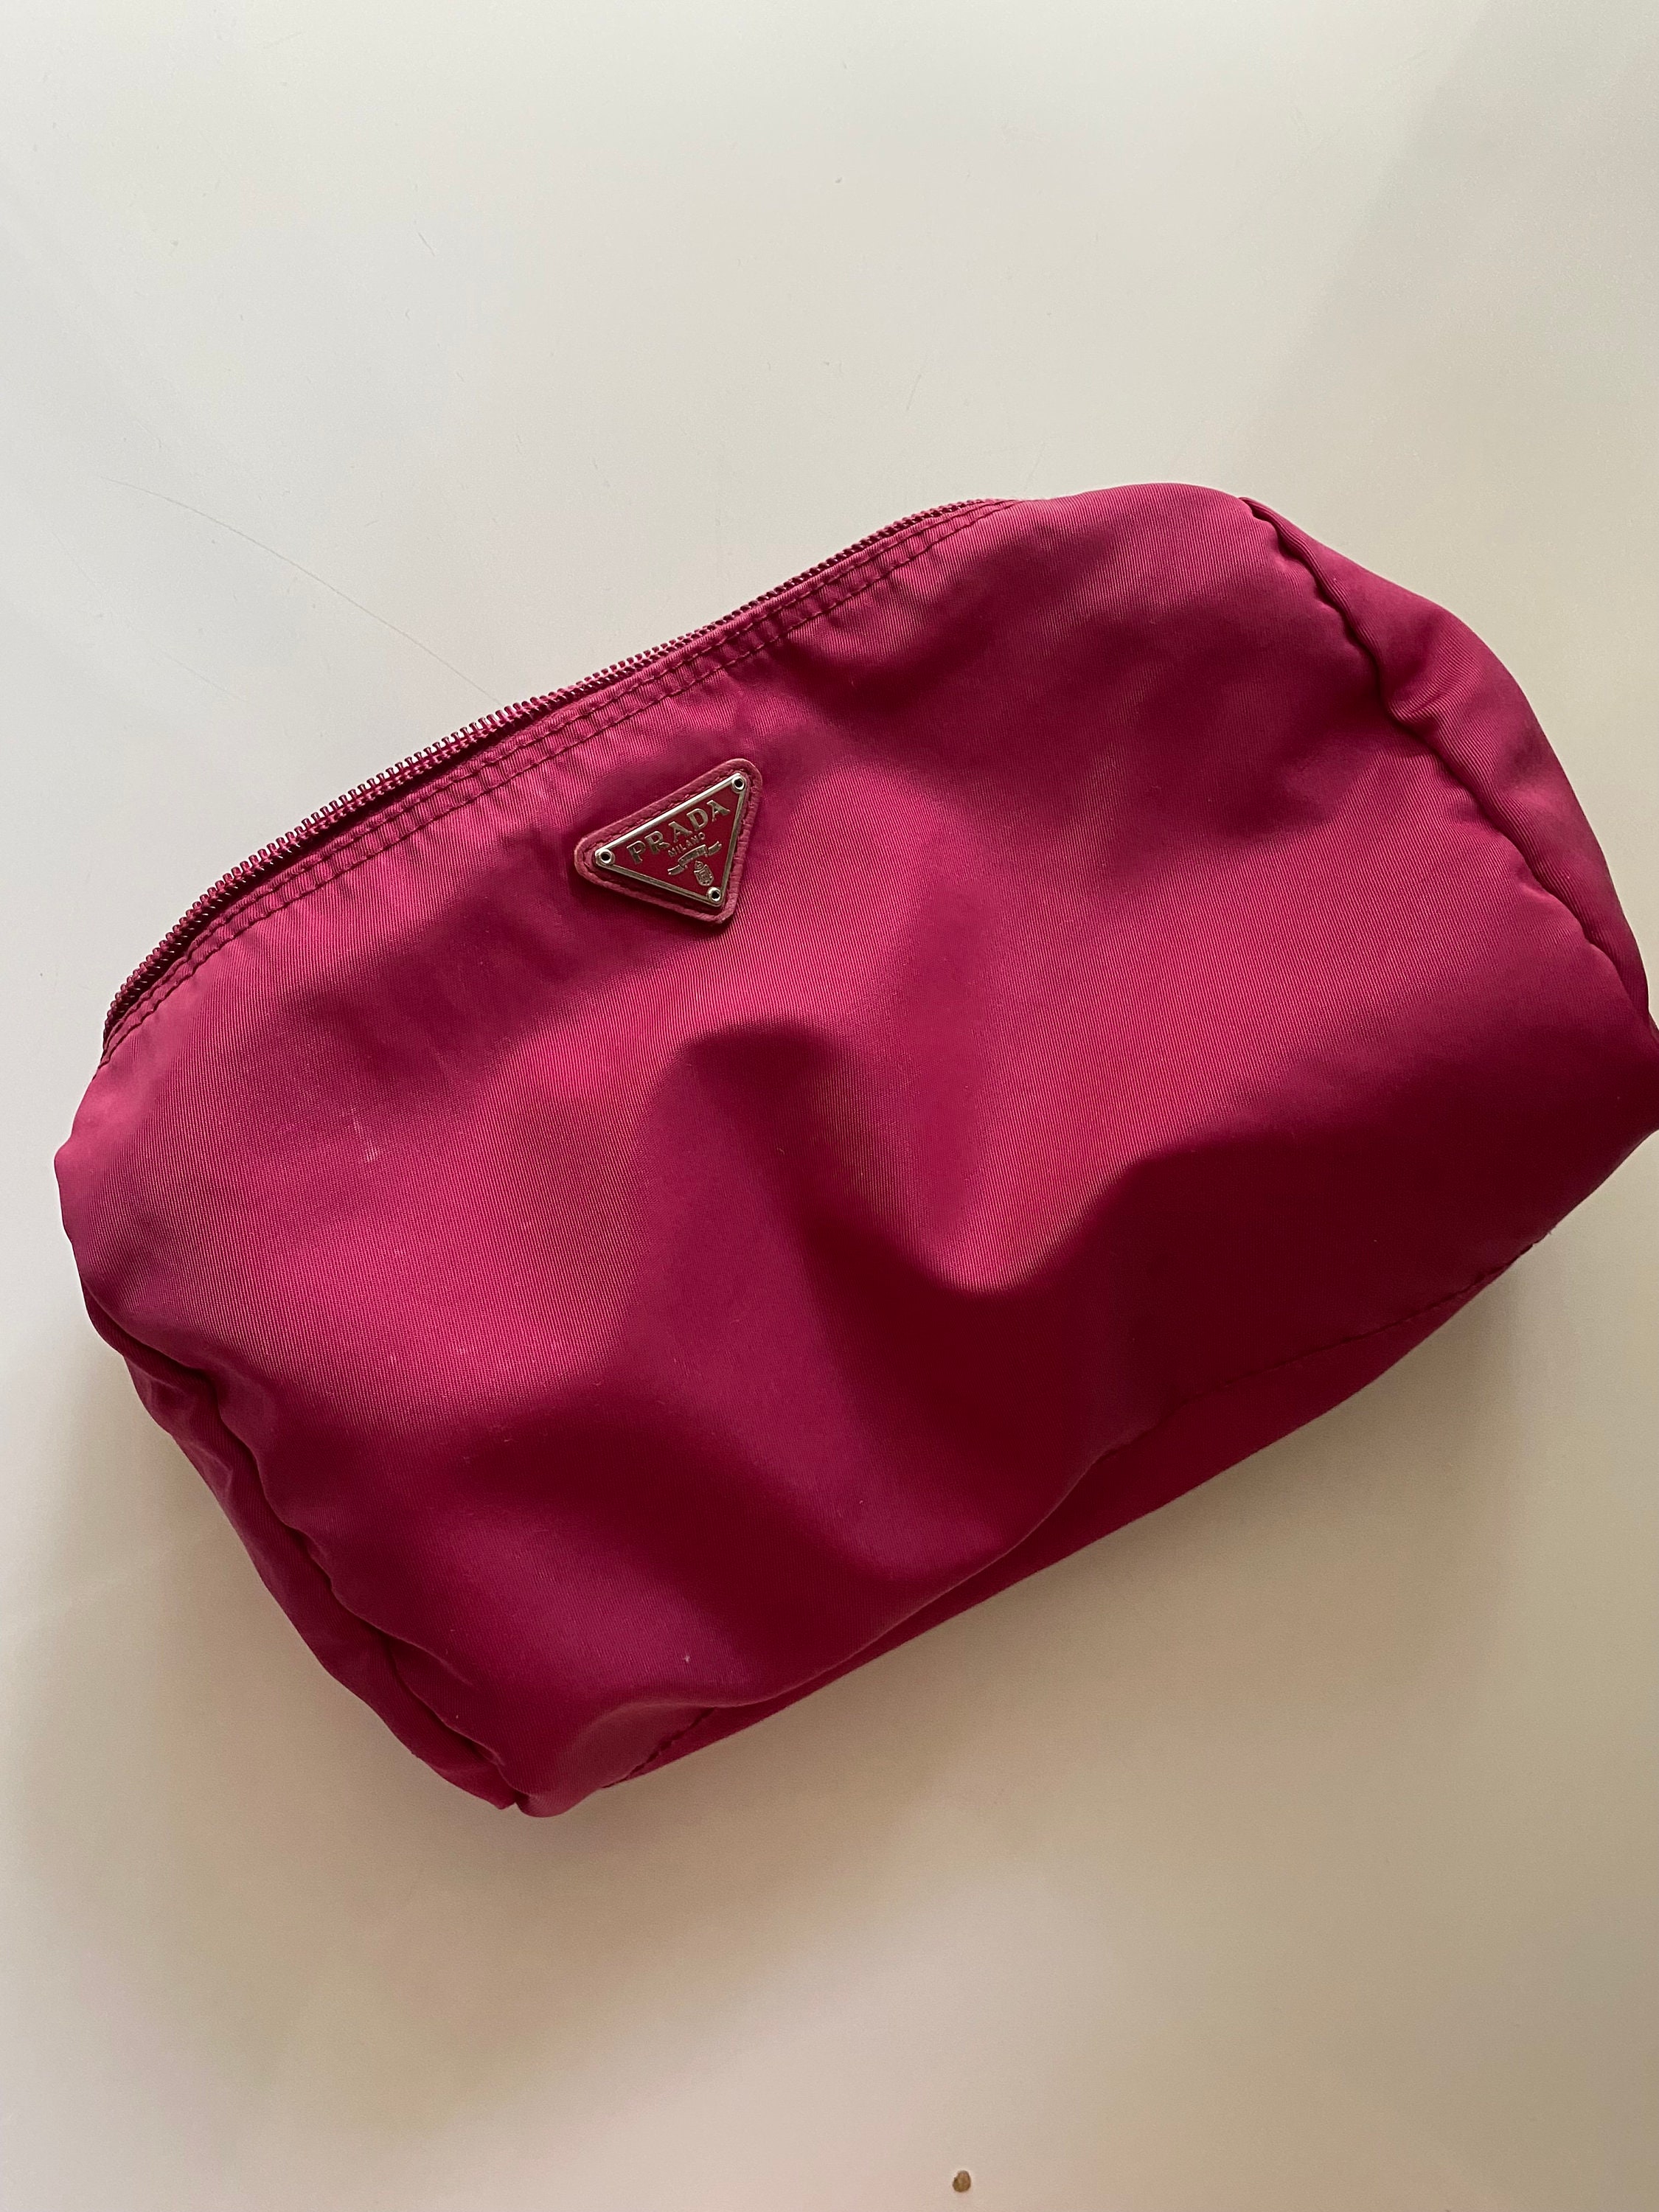 PRADA+BEAUTY+Pink+Triangle+Makeup+Bag+Pouch+Crossbody+Cosmetic+Bag+Purse+Clutch  for sale online